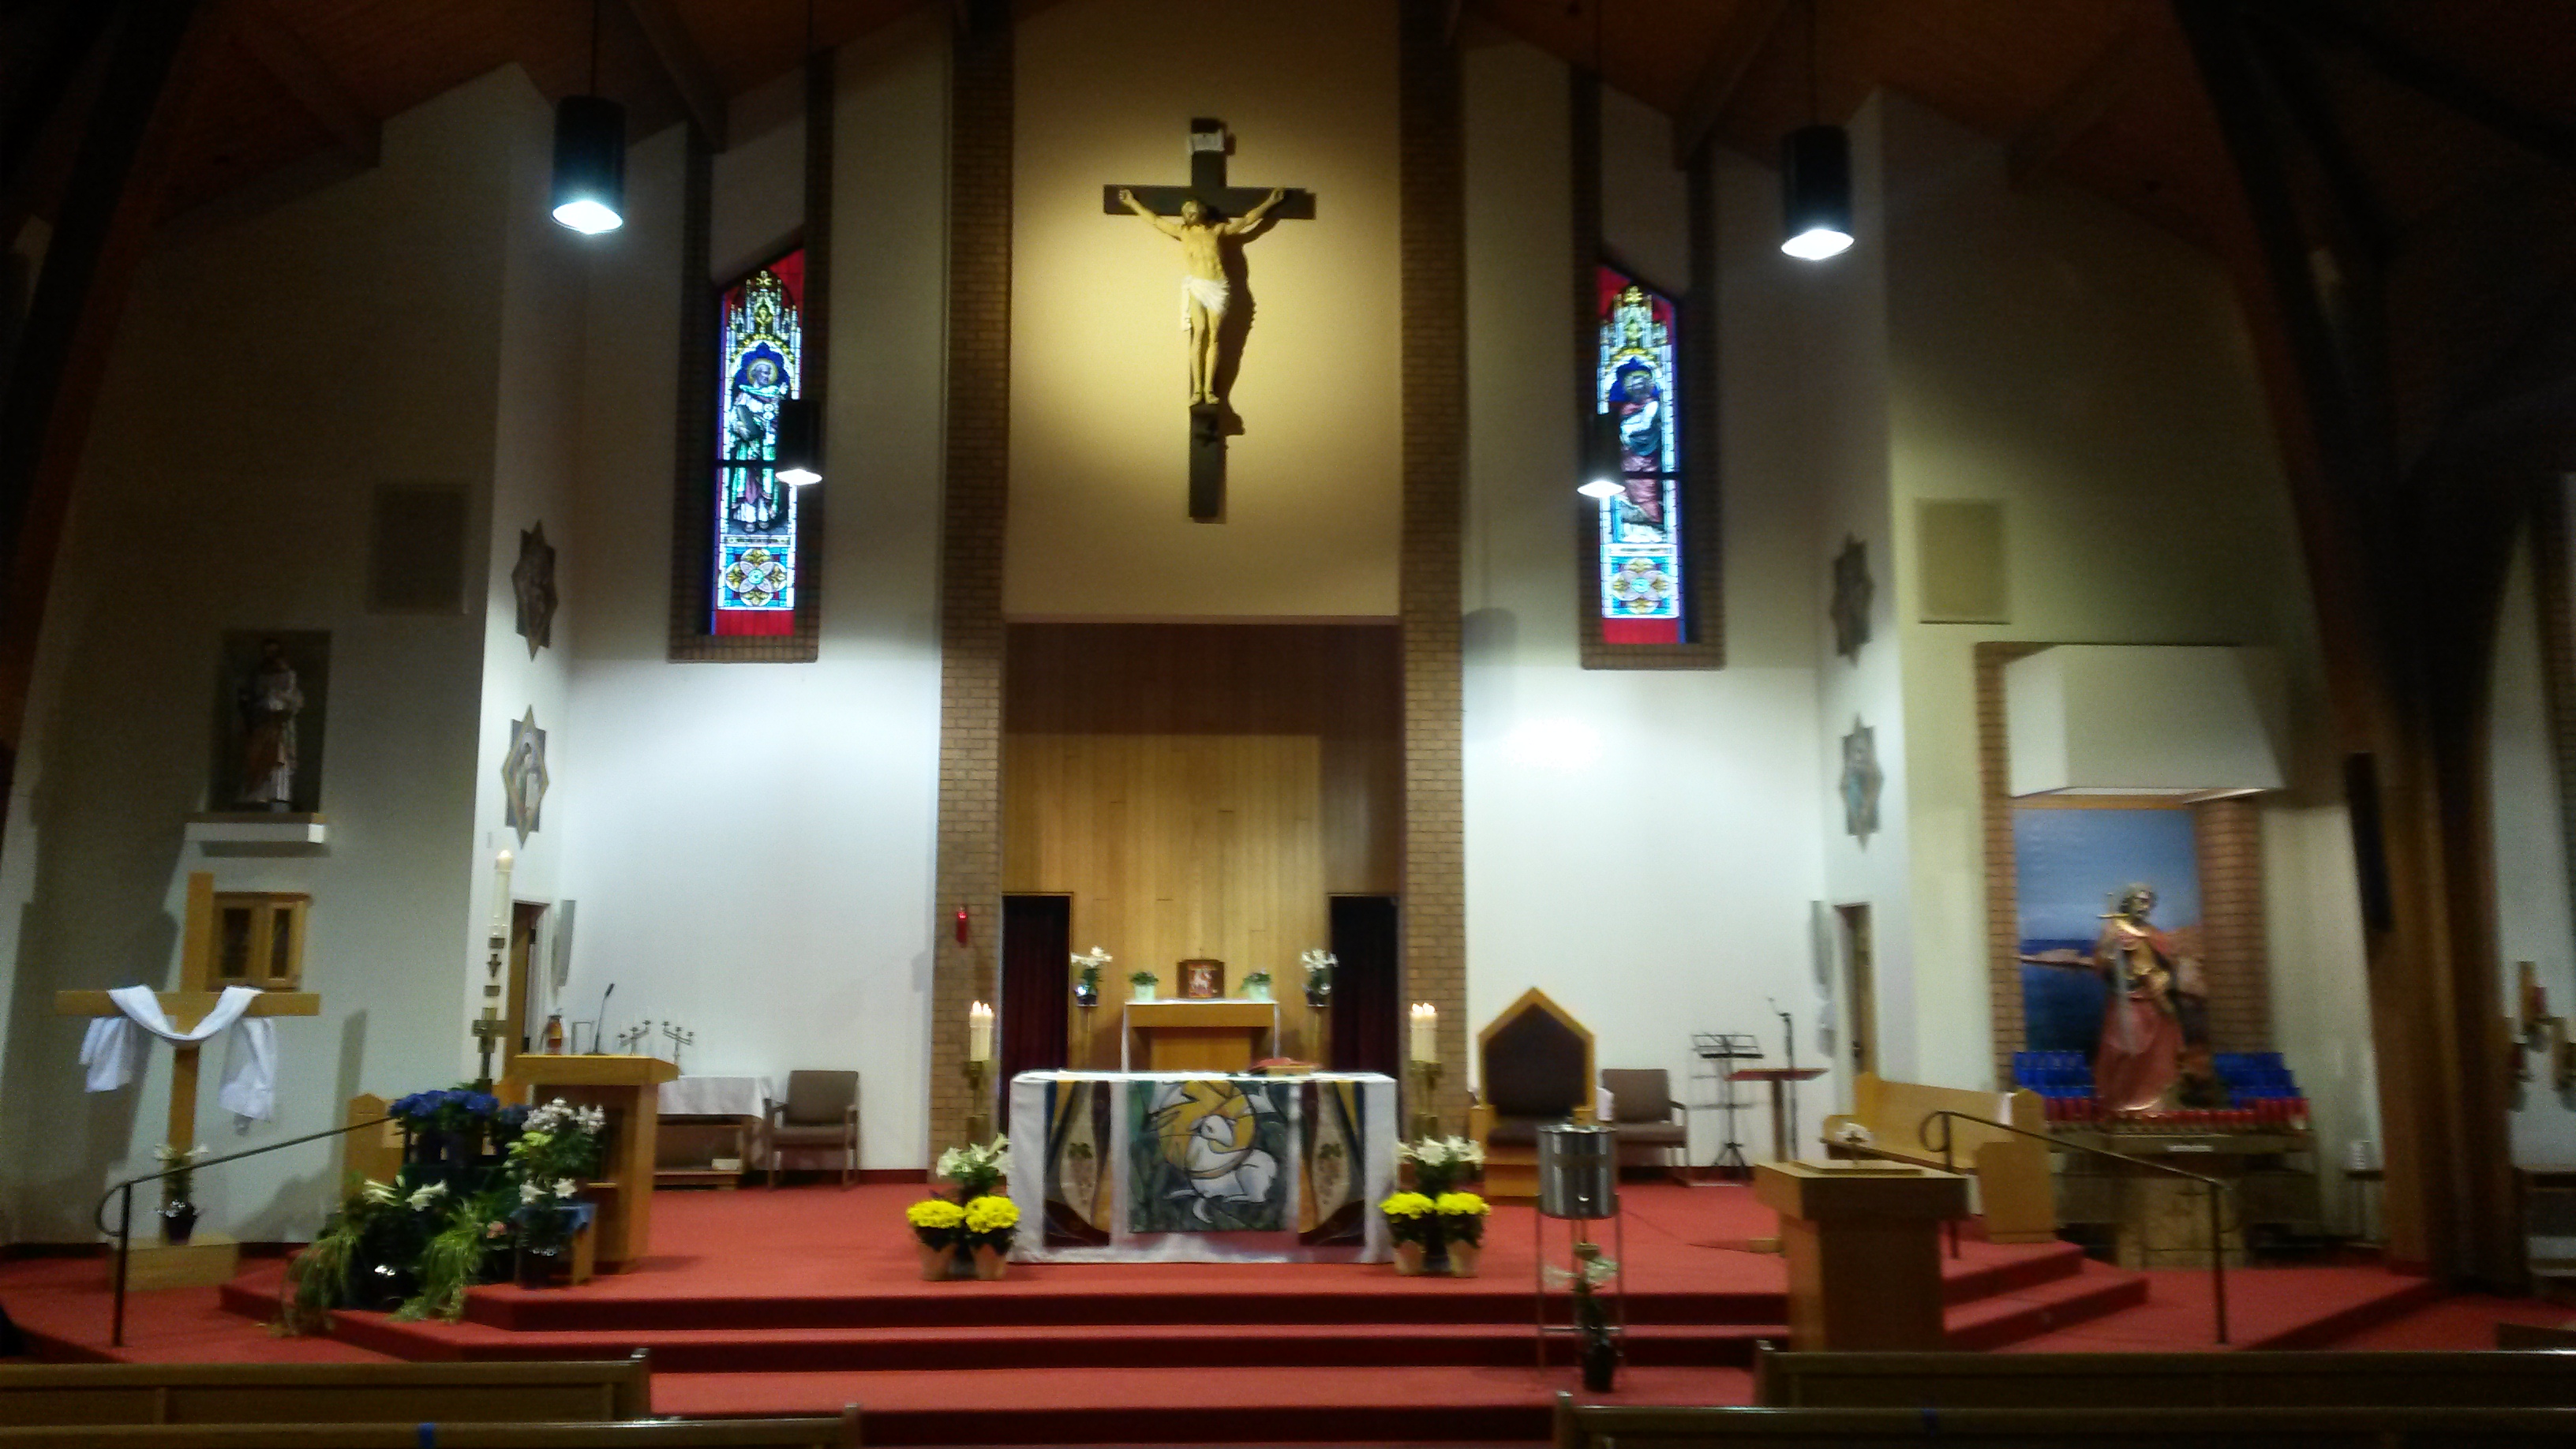 This is an image of the front of the church.  It includes the alter as well as the side areas.